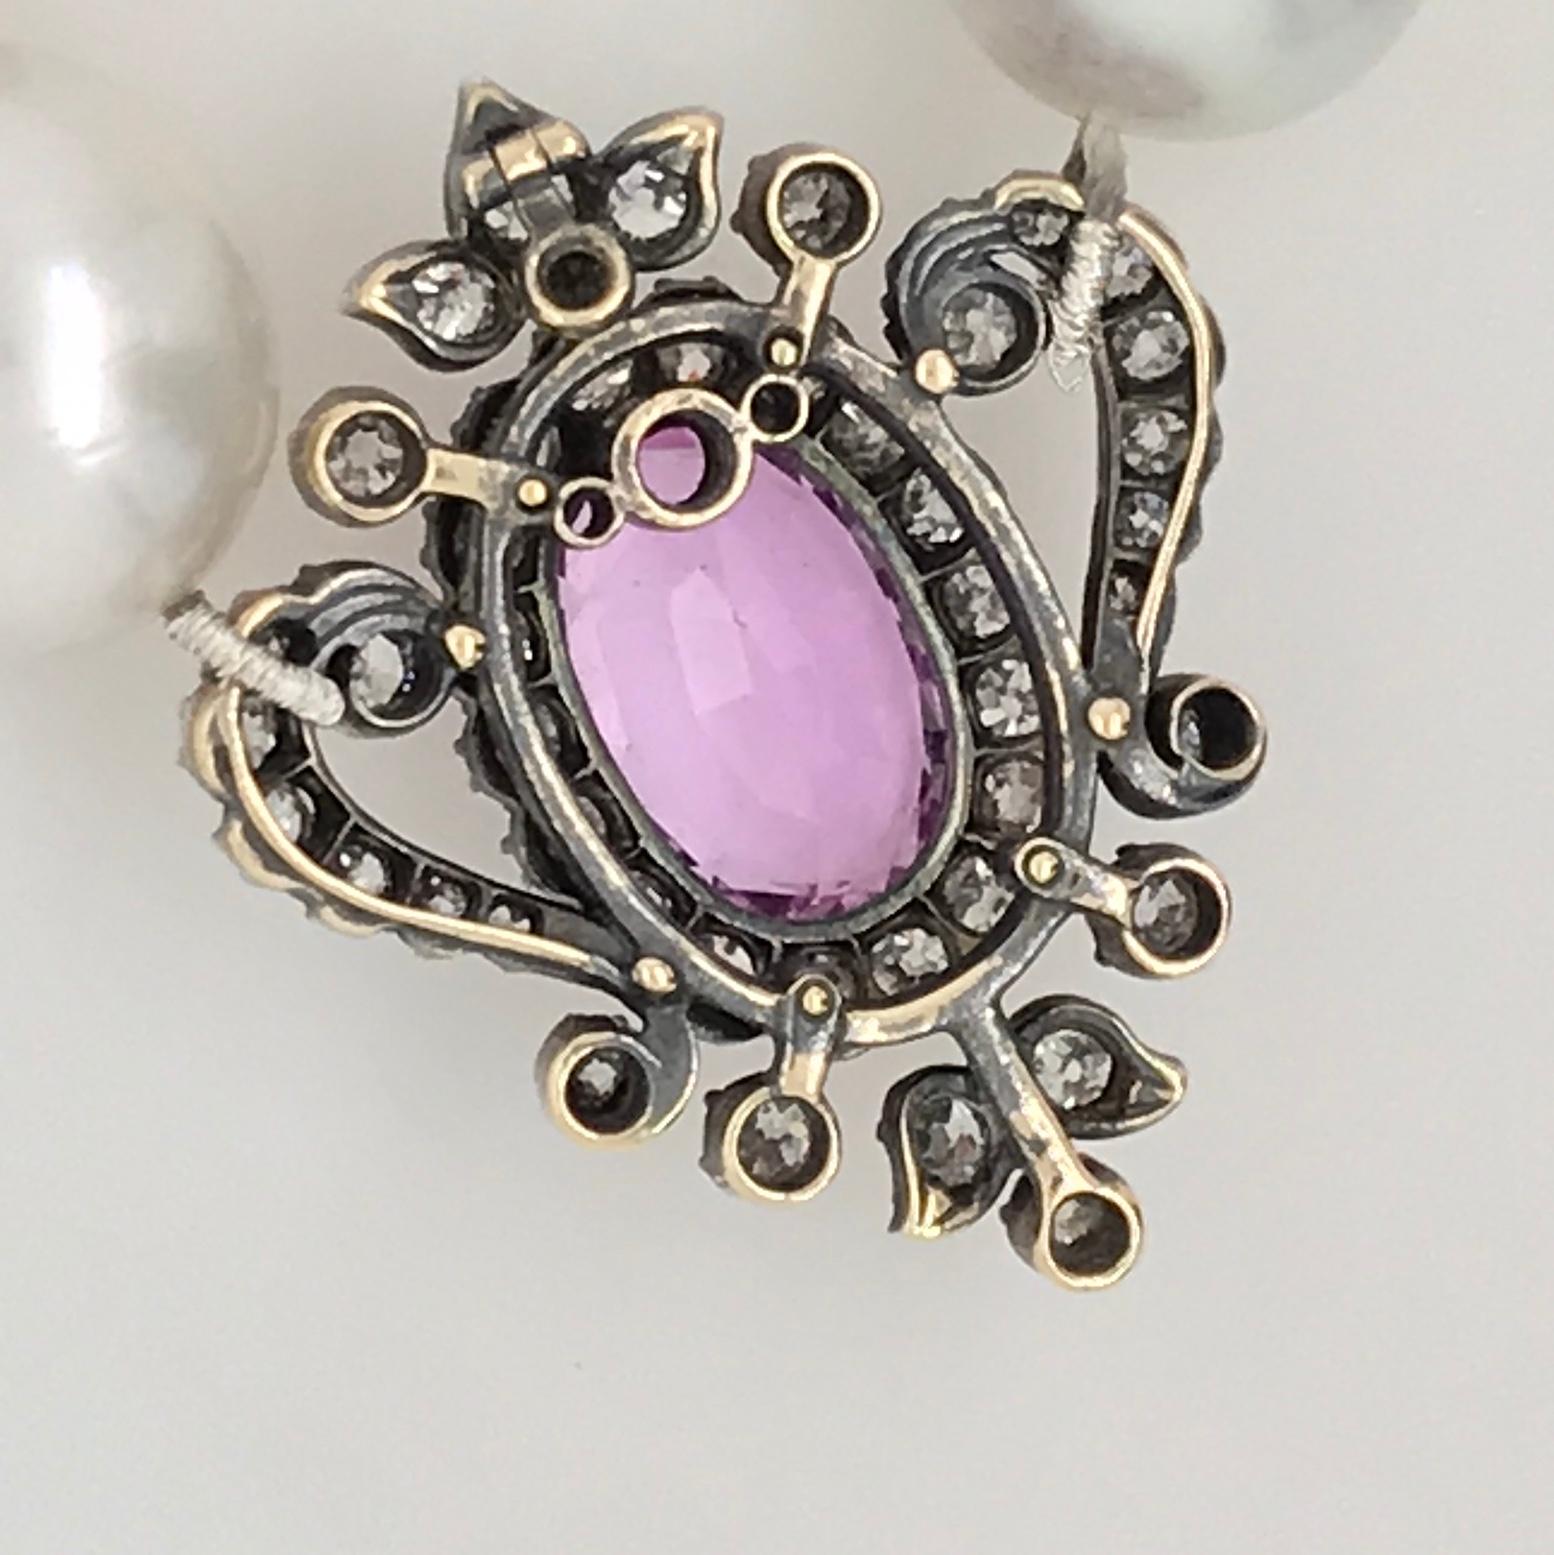 Georgian Oval Pink Topaz and Old Cut Diamond Pendant Set in Silver and Gold (Ovalschliff)